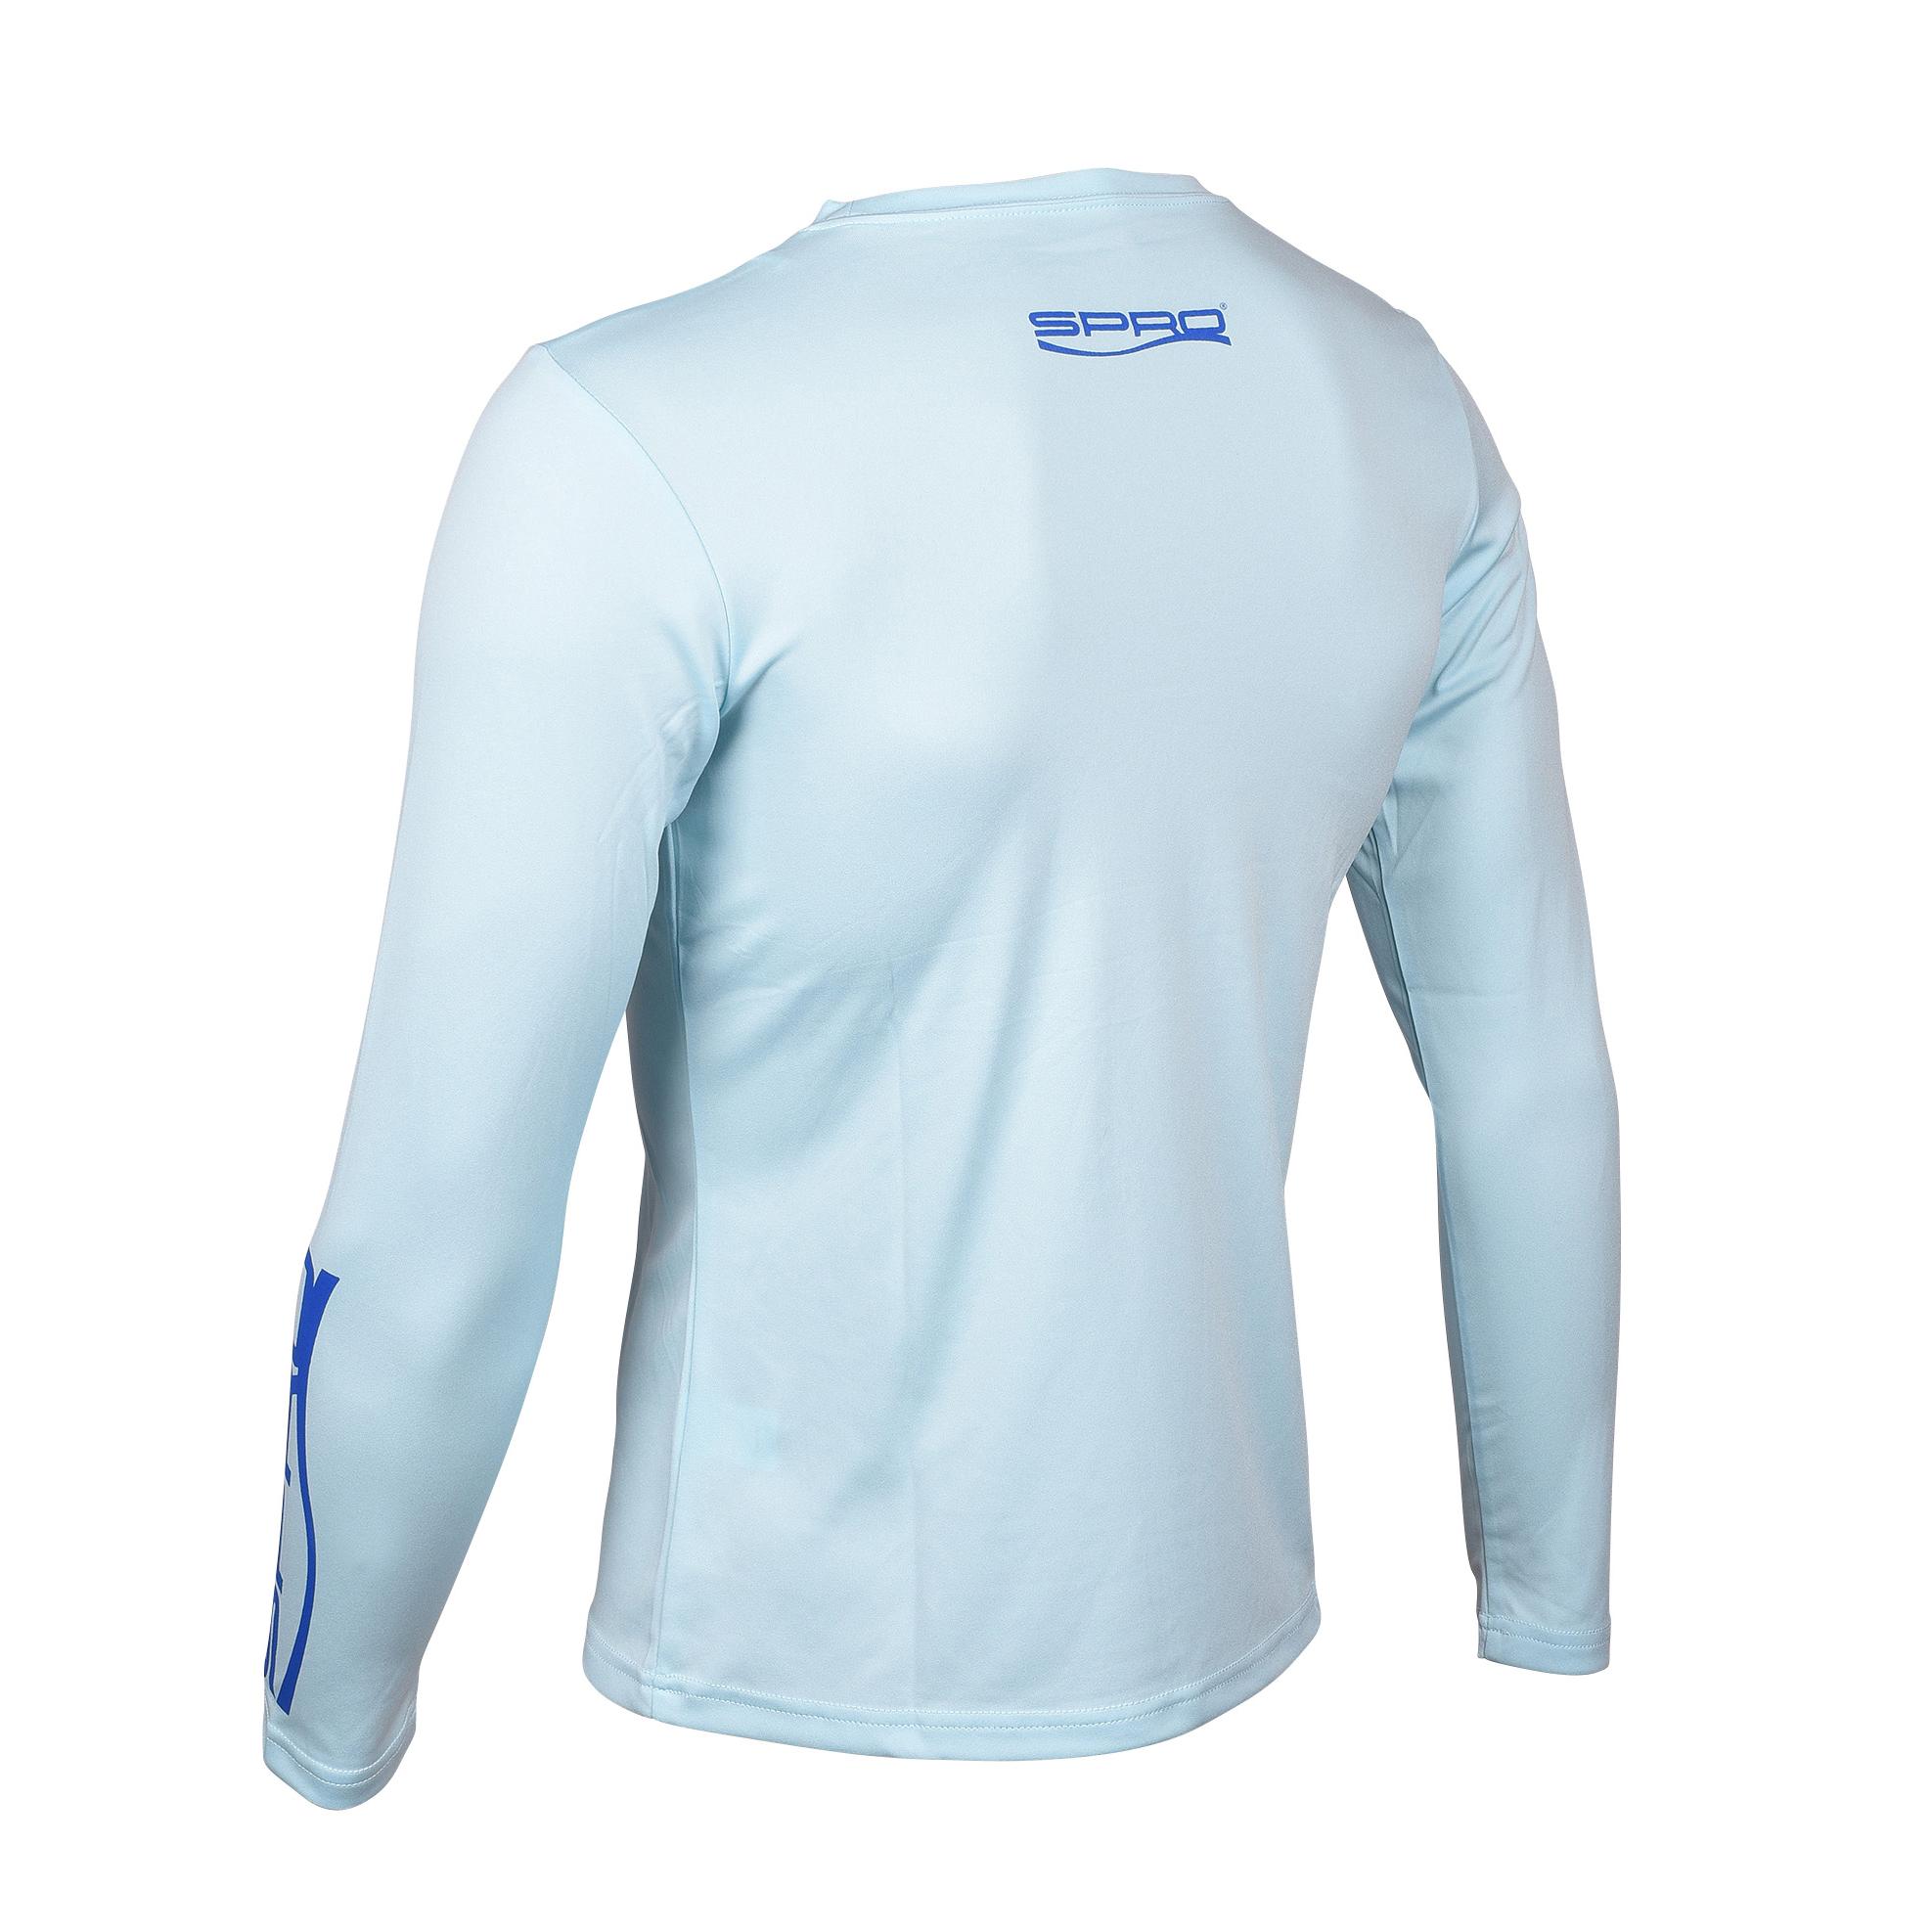 Womens Cooling Performance Crew Shirt (Long Sleeve) - SPRO